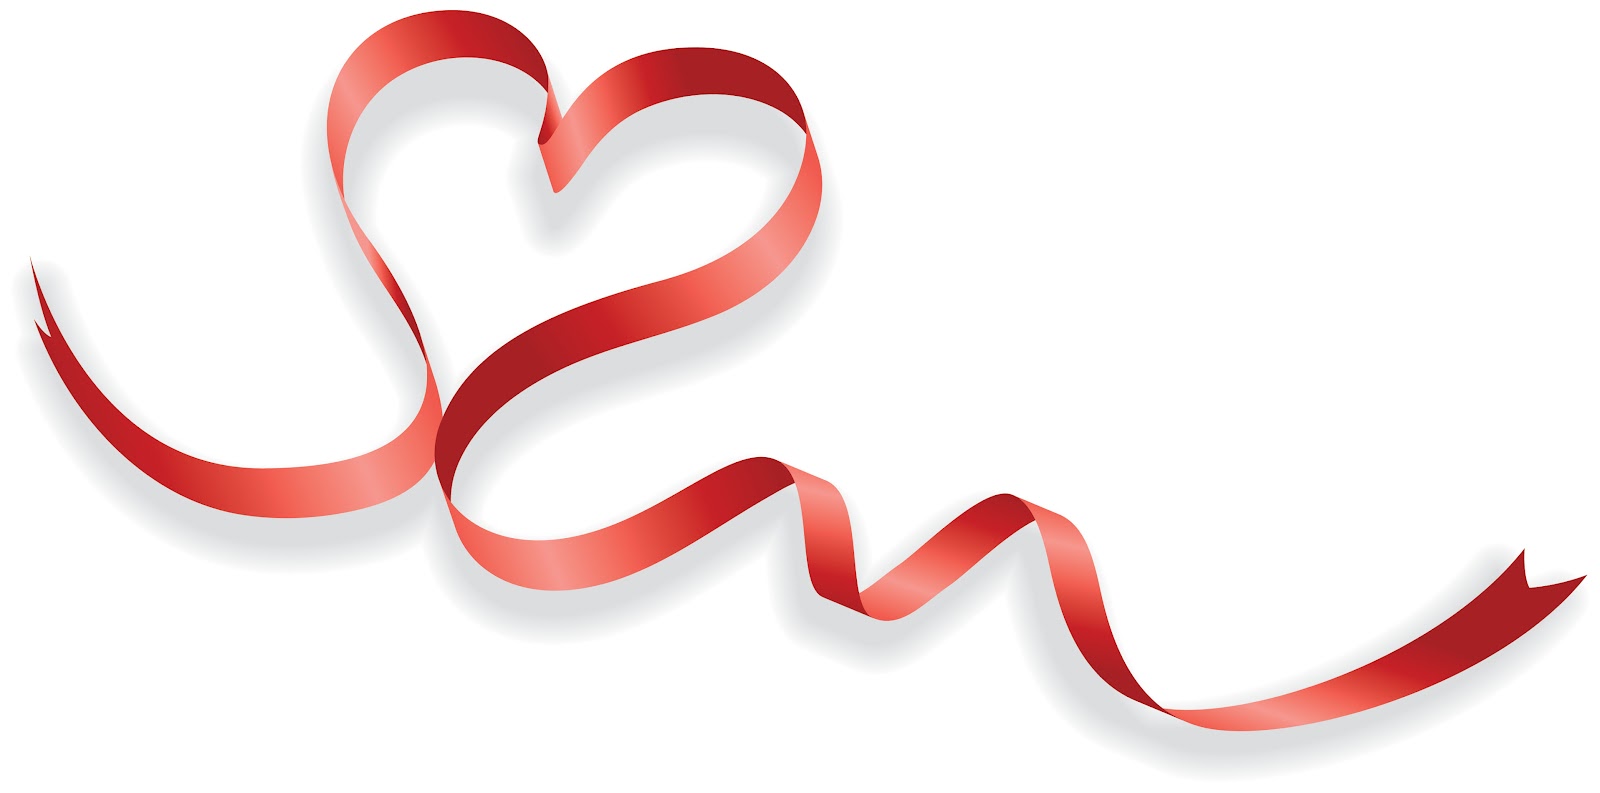 Free: Heart Ribbon - Wedding Heart Background Png 